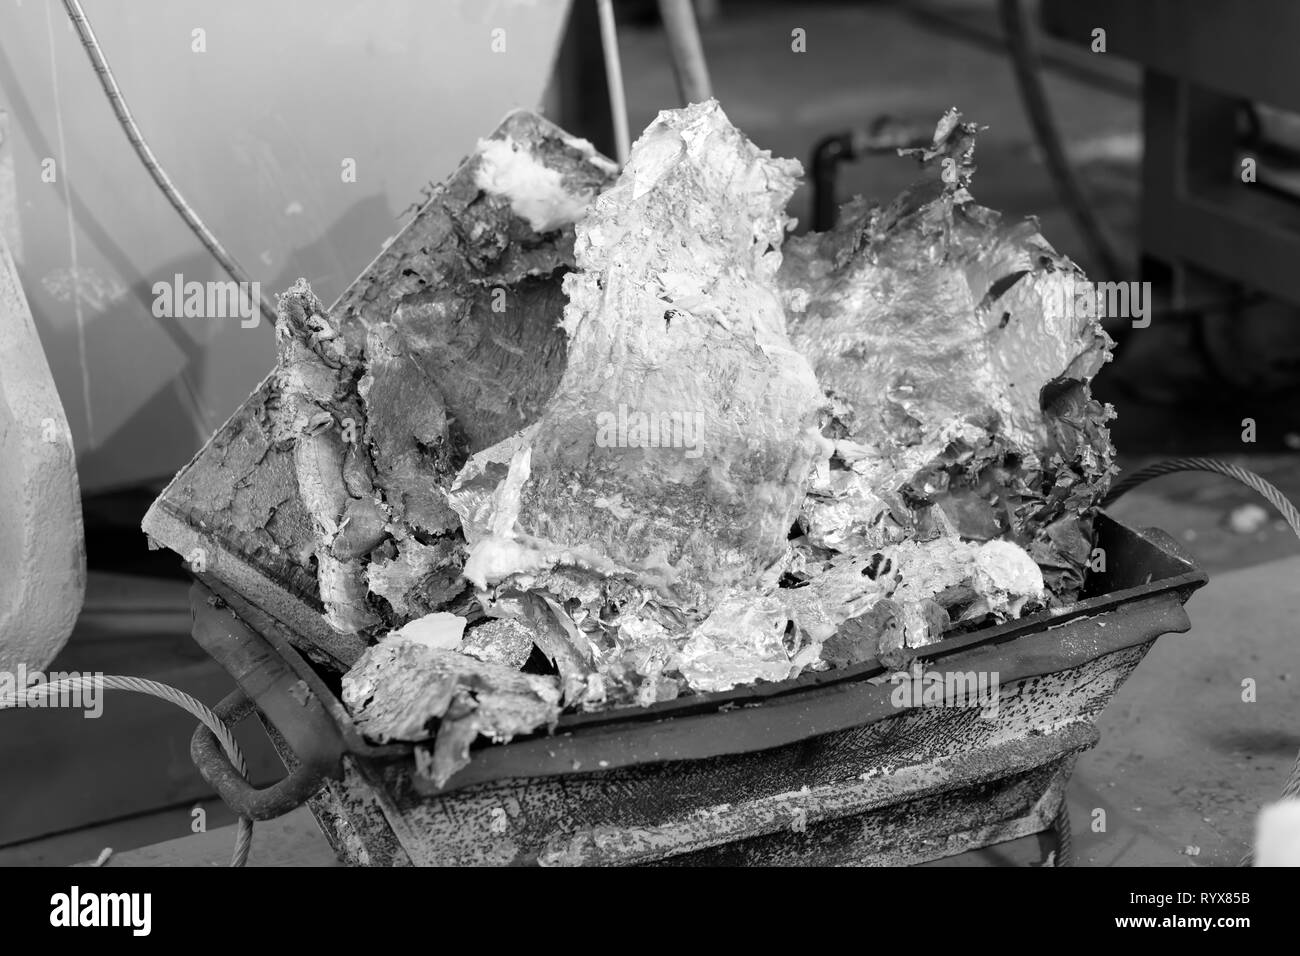 aluminum melted in a container recovered during foundry clean task. Industrial black and white photo Stock Photo